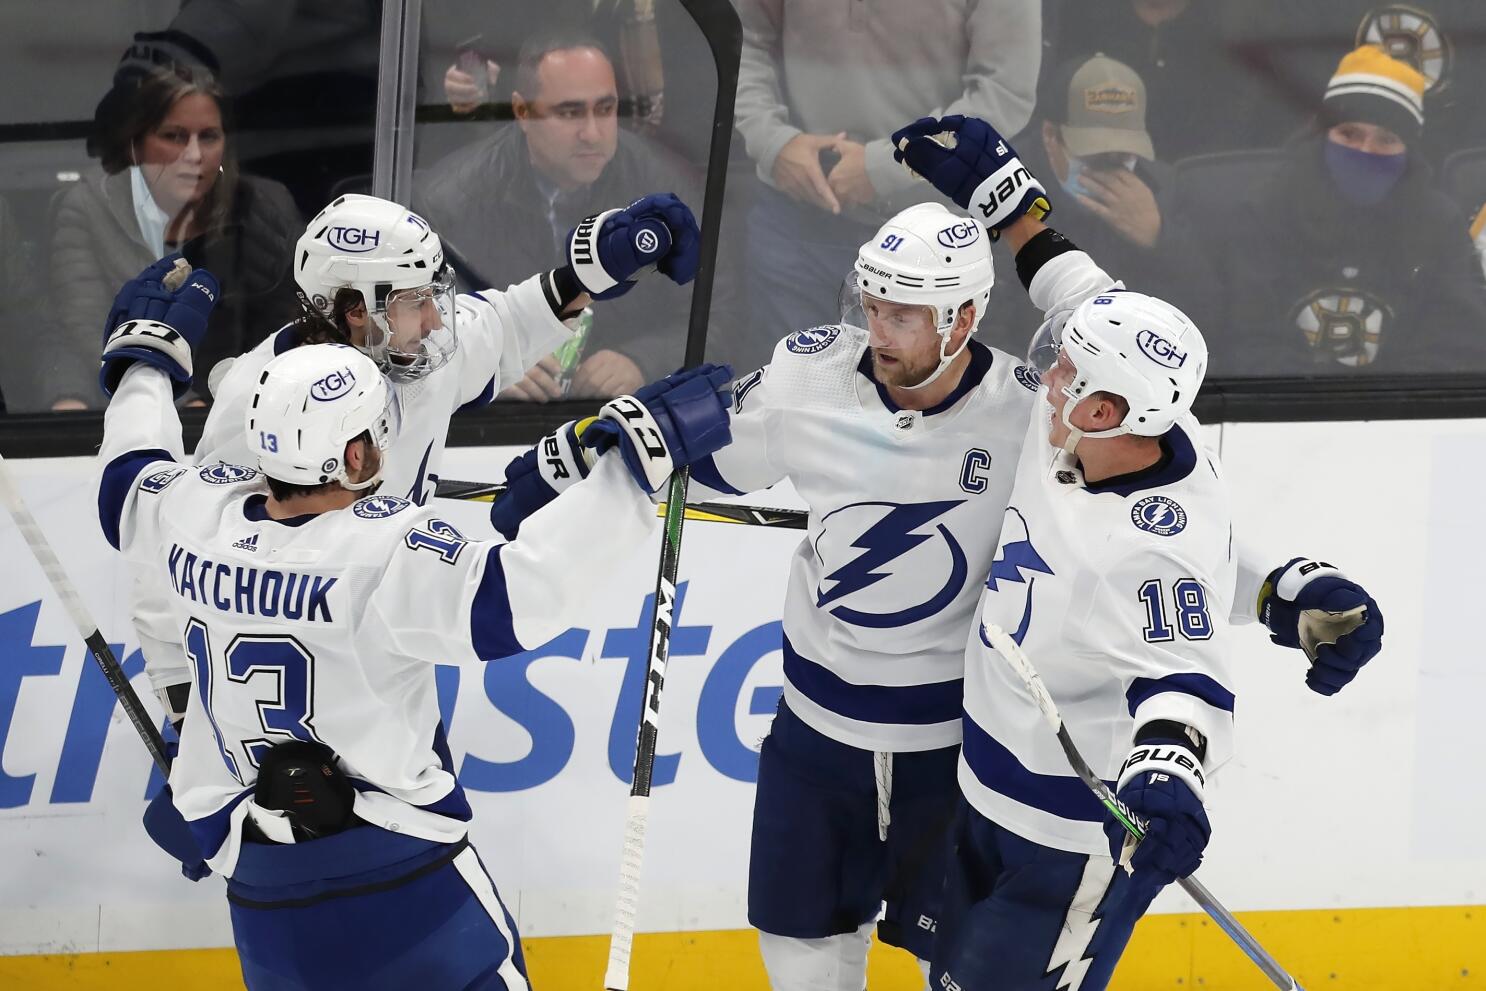 Stamkos scores in OT to lead Lightning past Bruins 3-2 - The San